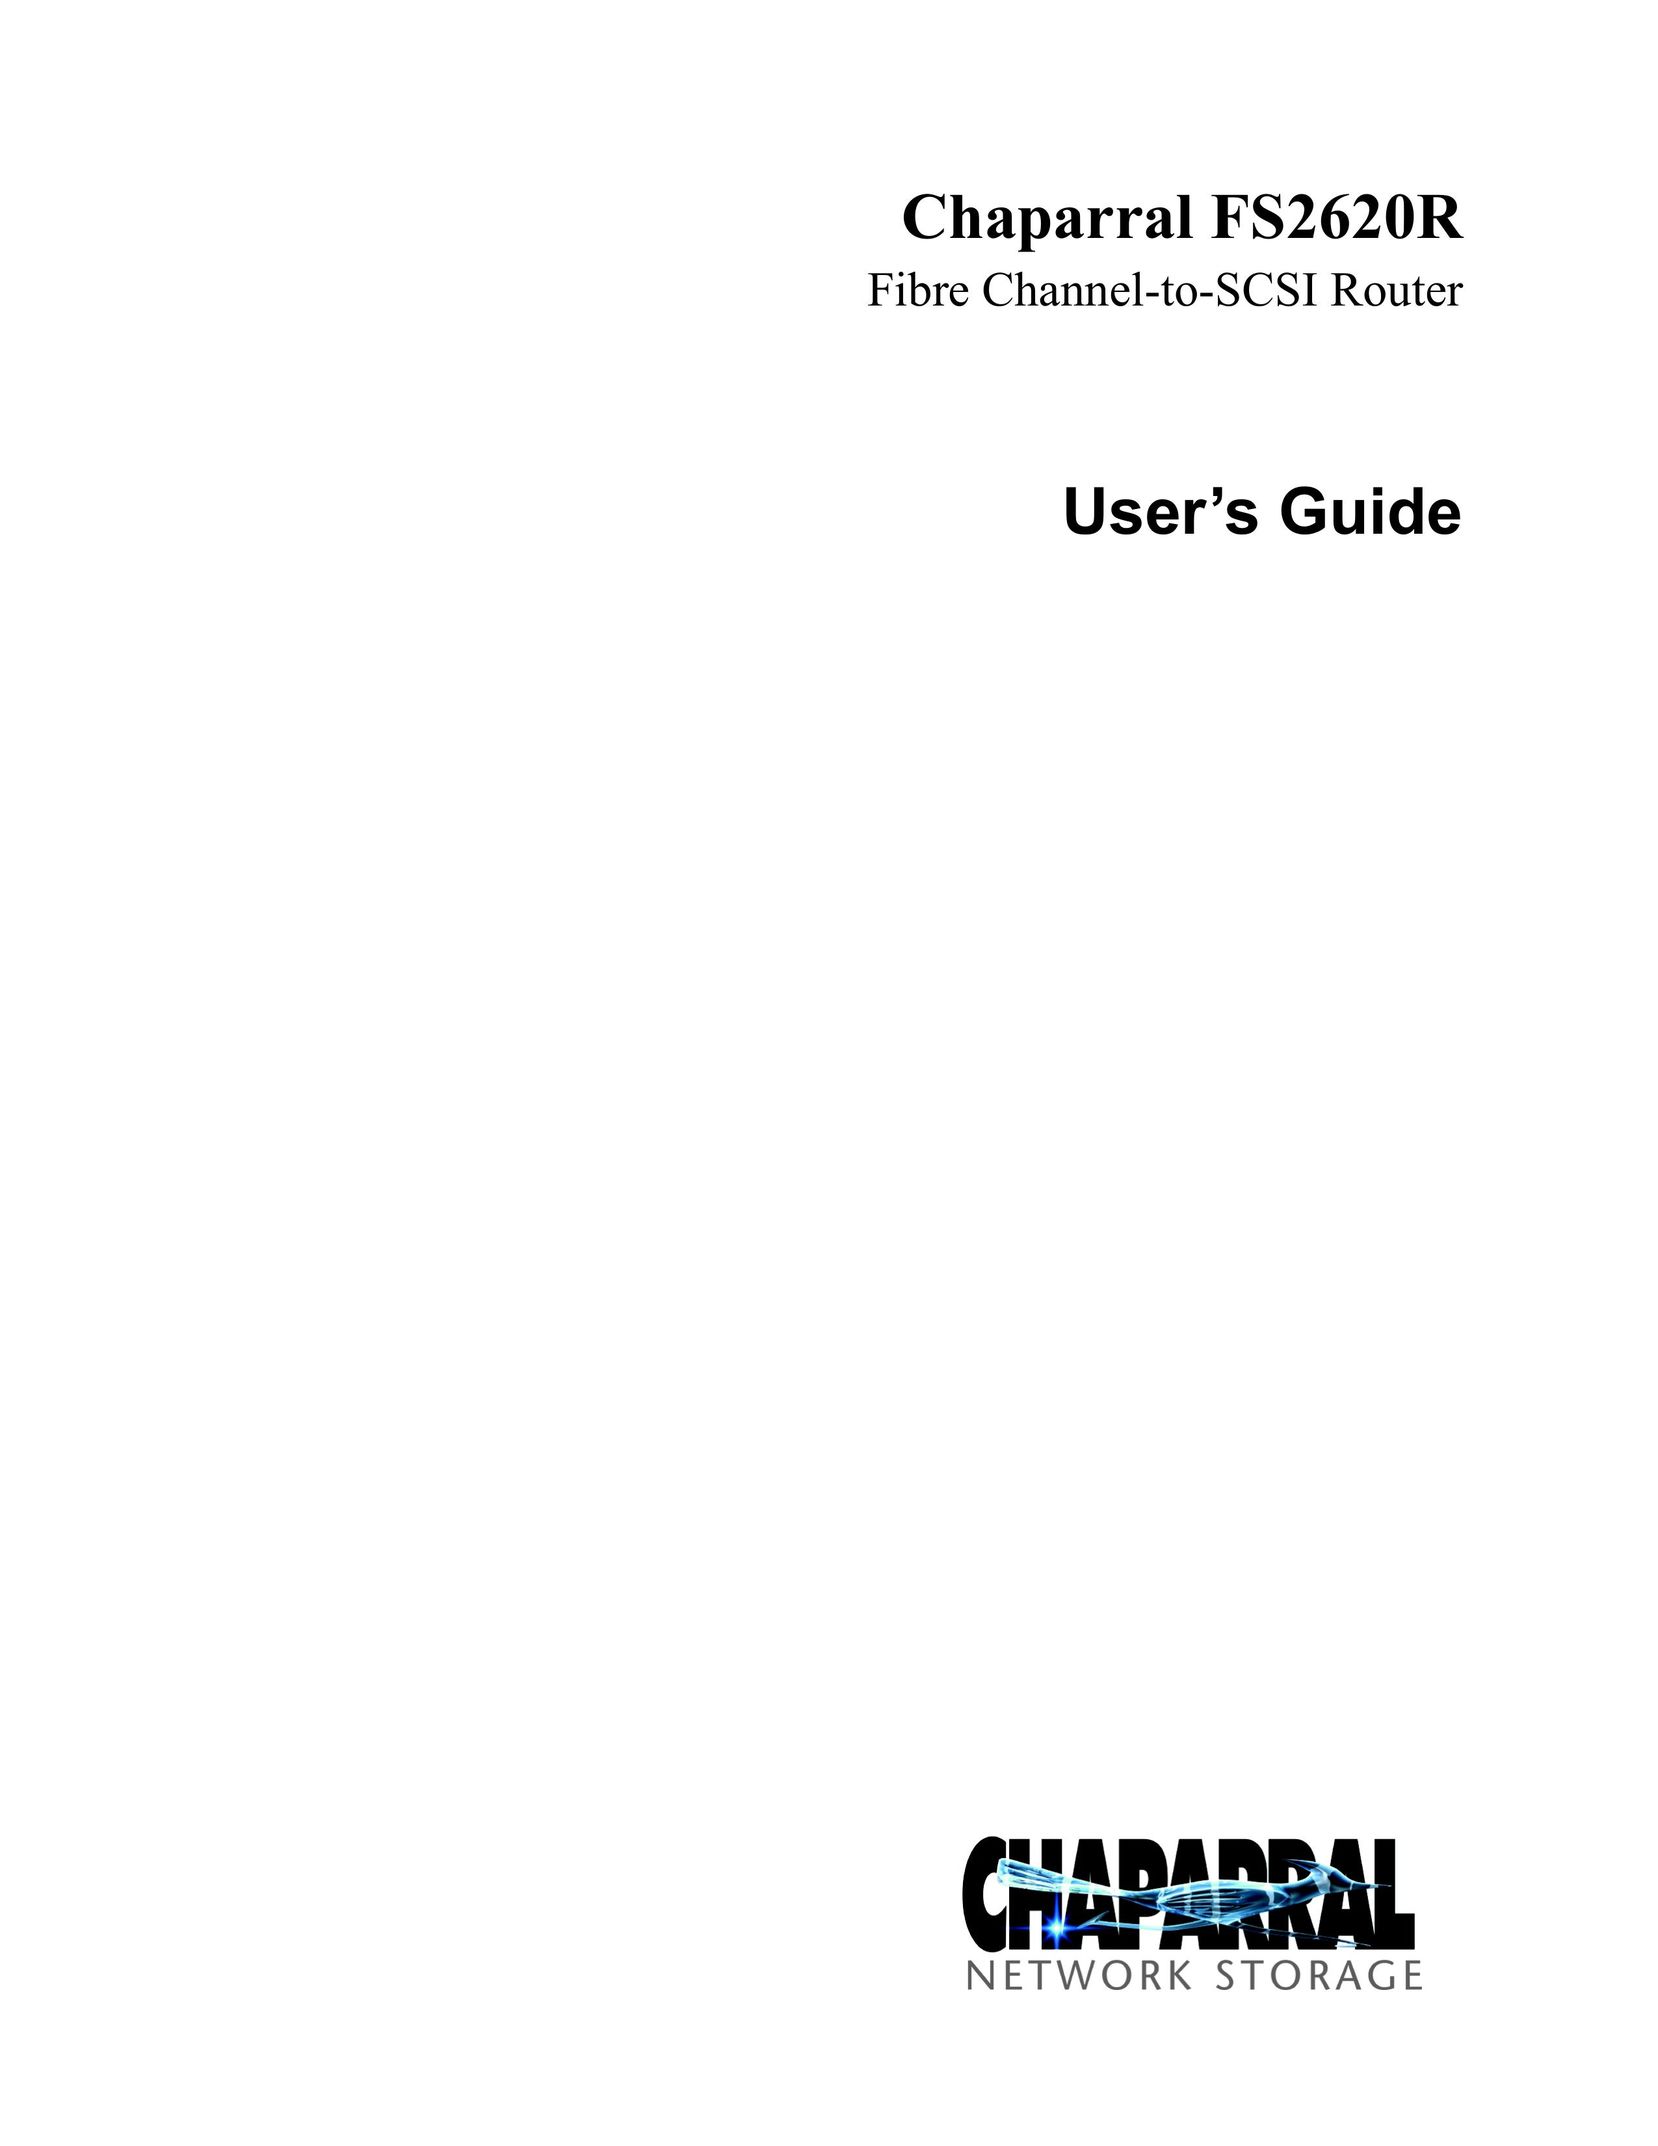 Chaparral FS2620R Network Router User Manual